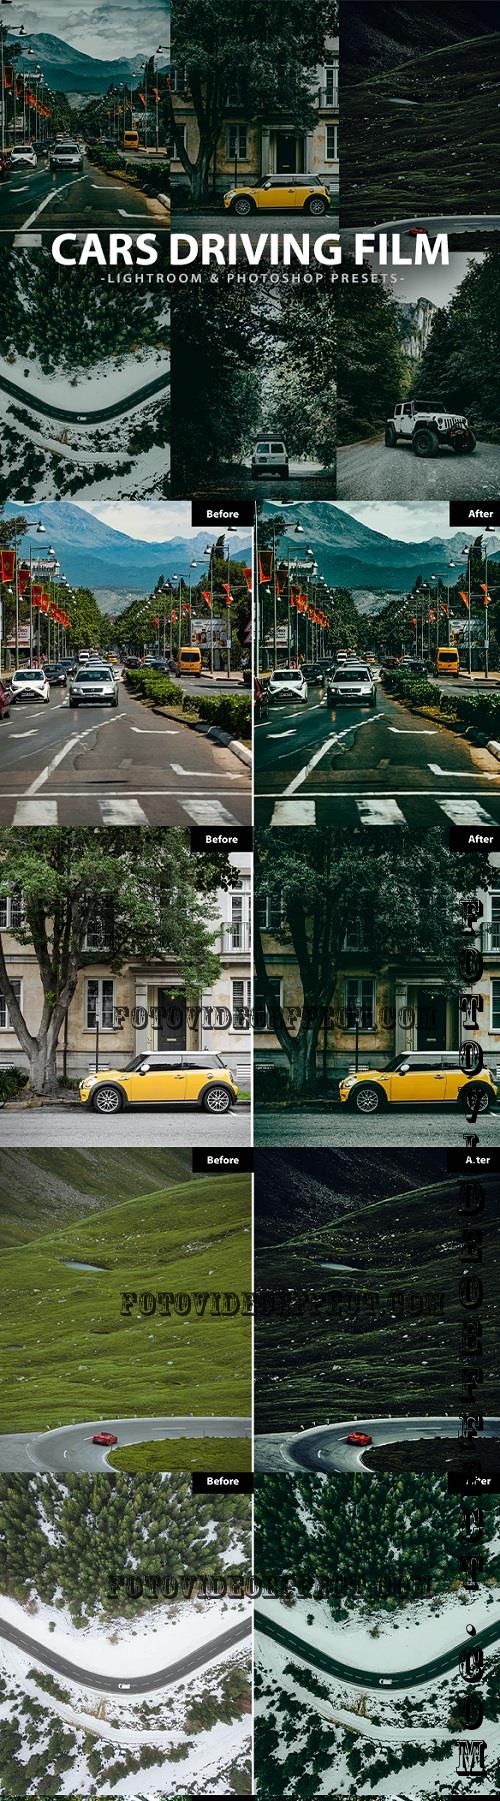 6 Cars Driving Film Lightroom and Photoshop Presets - 46593809